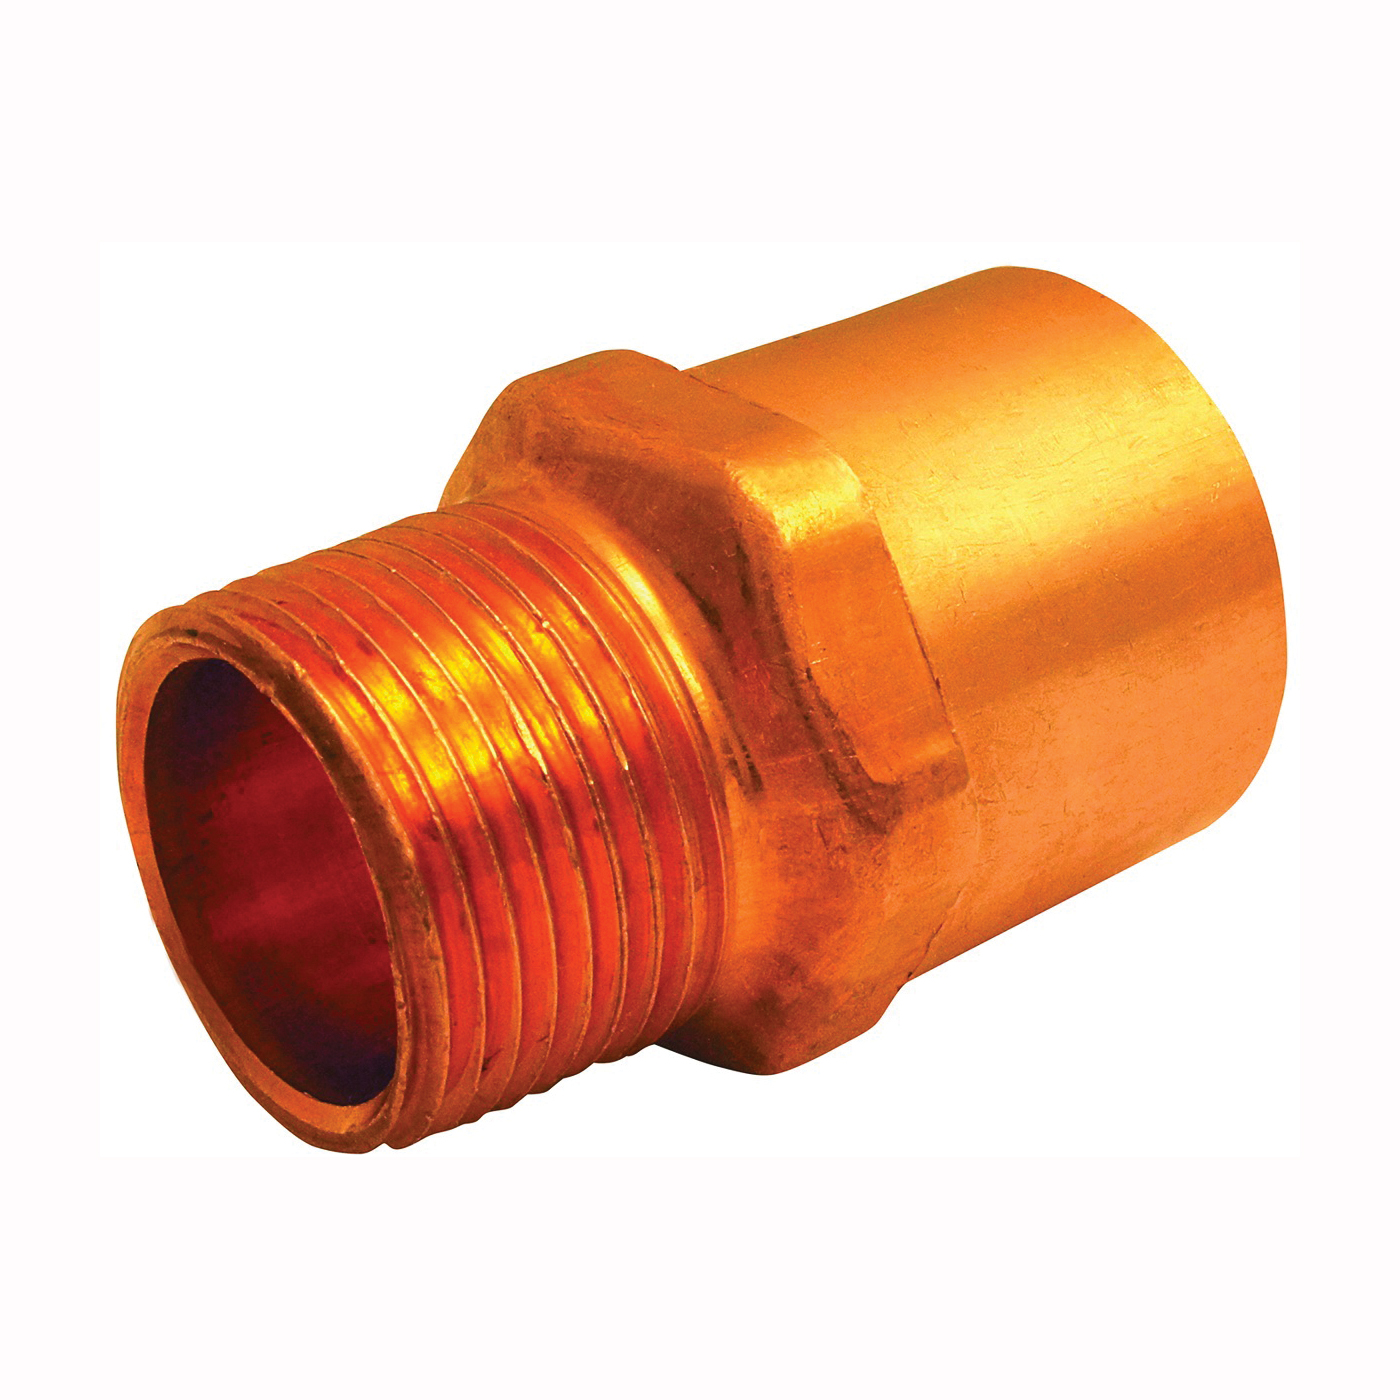 104R Series 30348 Reducing Pipe Adapter, 1 x 3/4 in, Sweat x MNPT, Copper